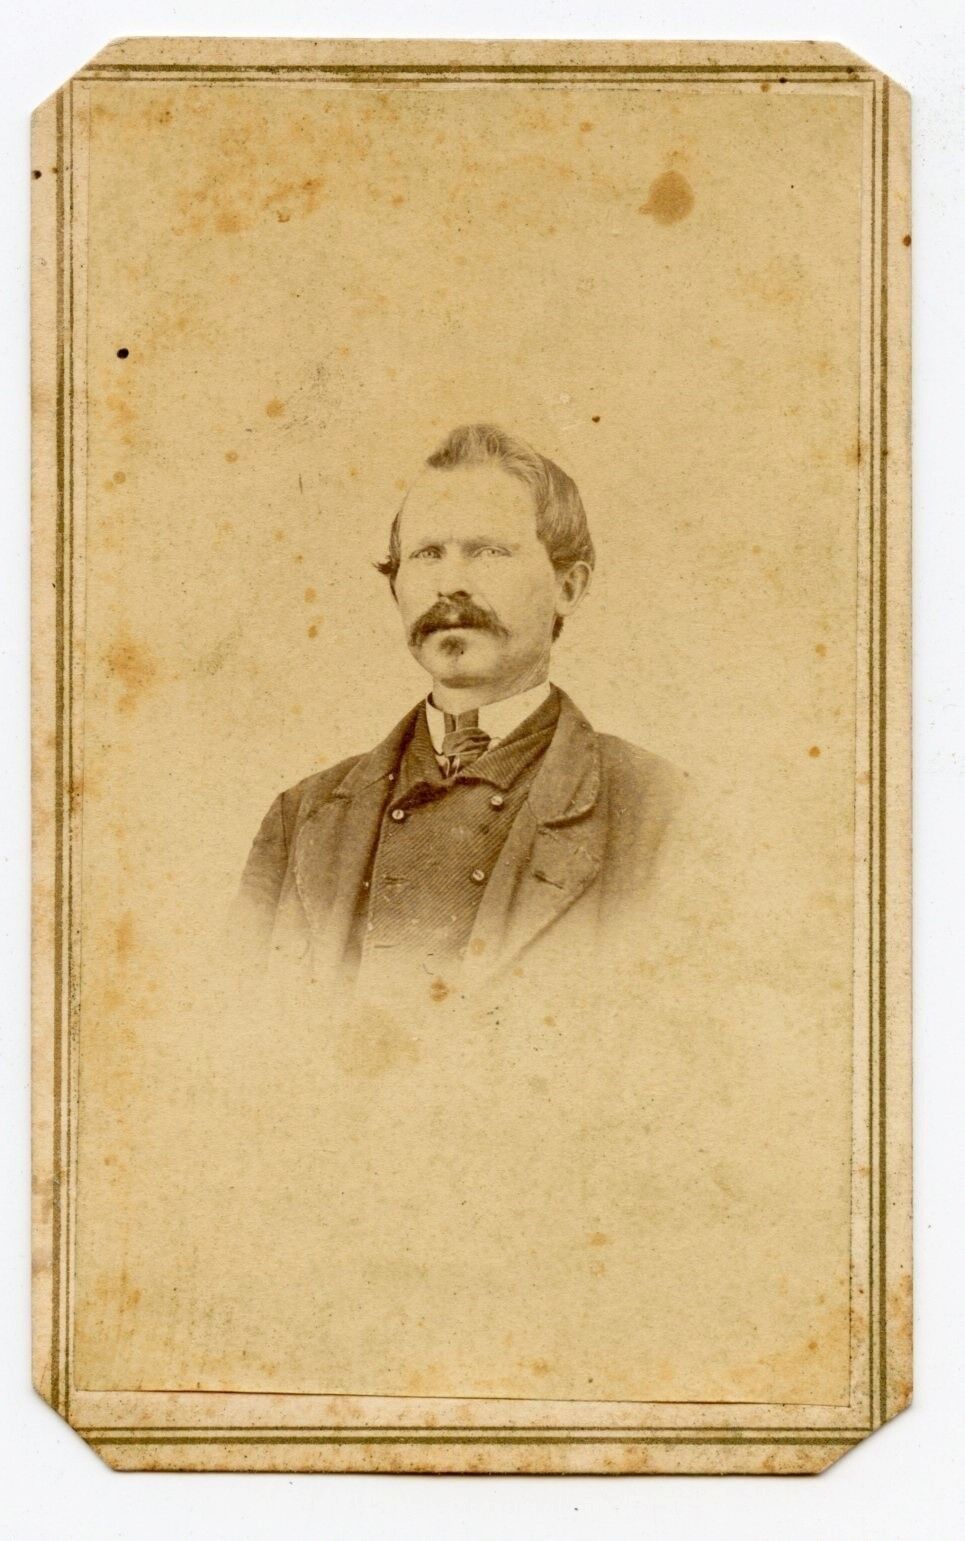 Moustached Man, Vintage CDV Photo with Two Cents Stamp on the back